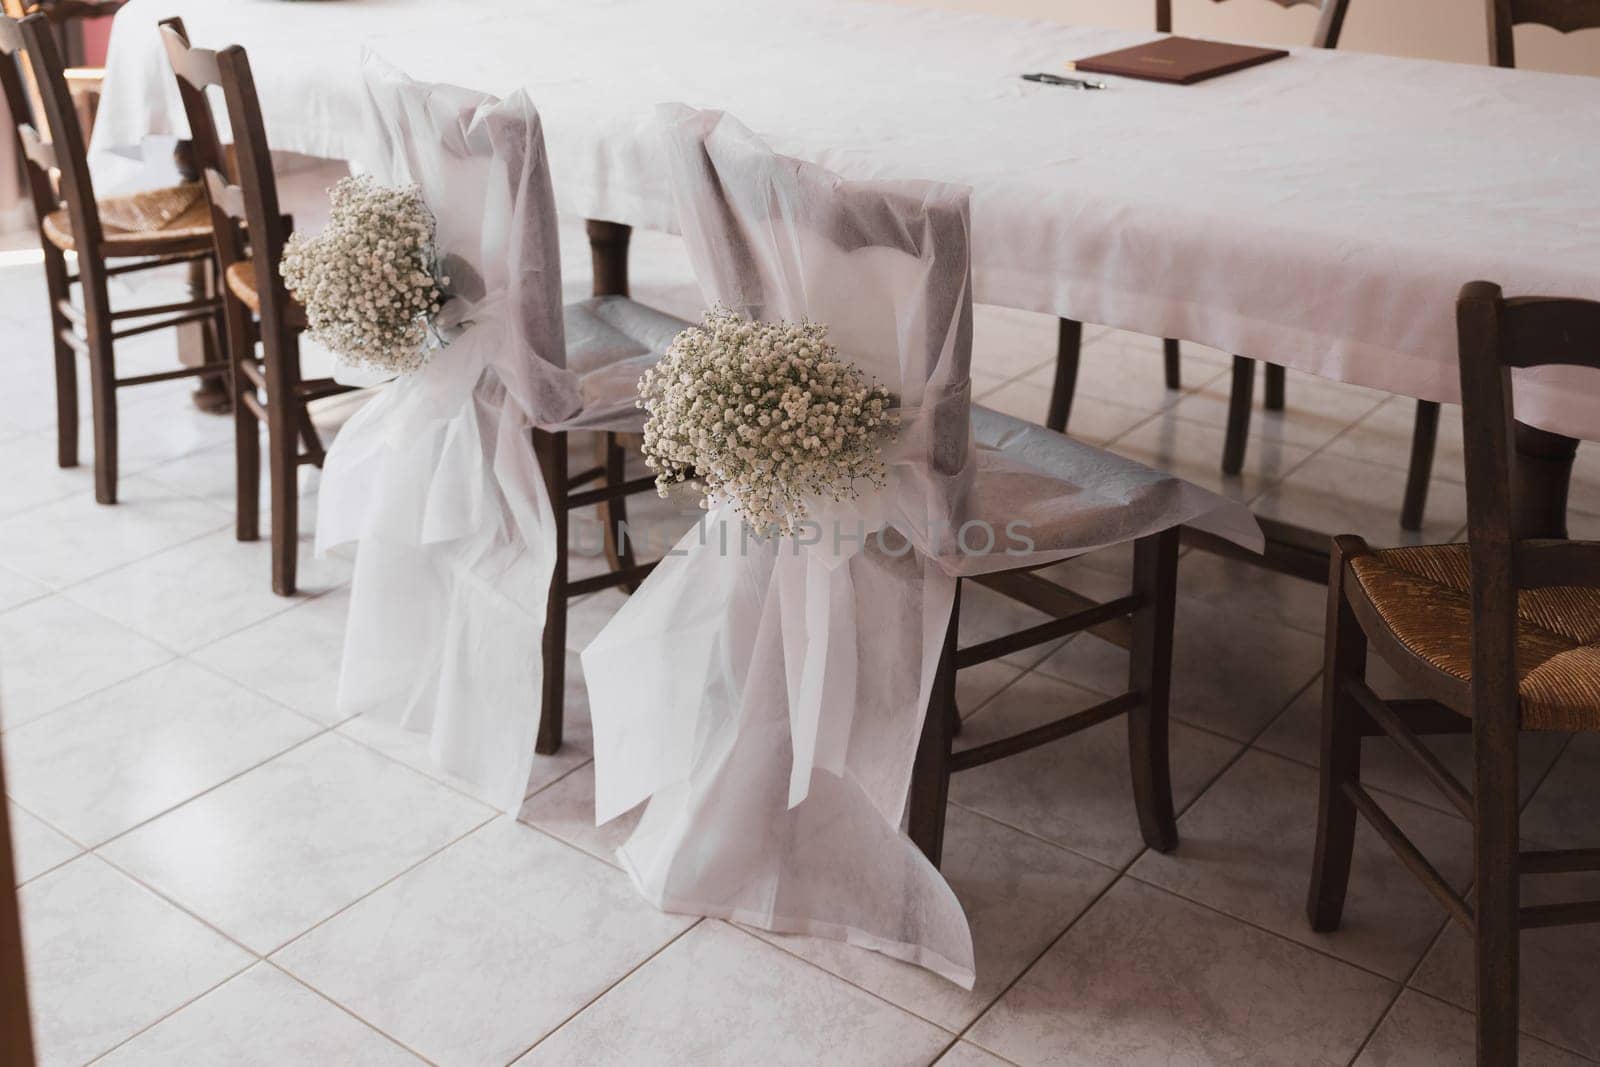 Wedding chairs decorated with white cloth and gypsophila flowers